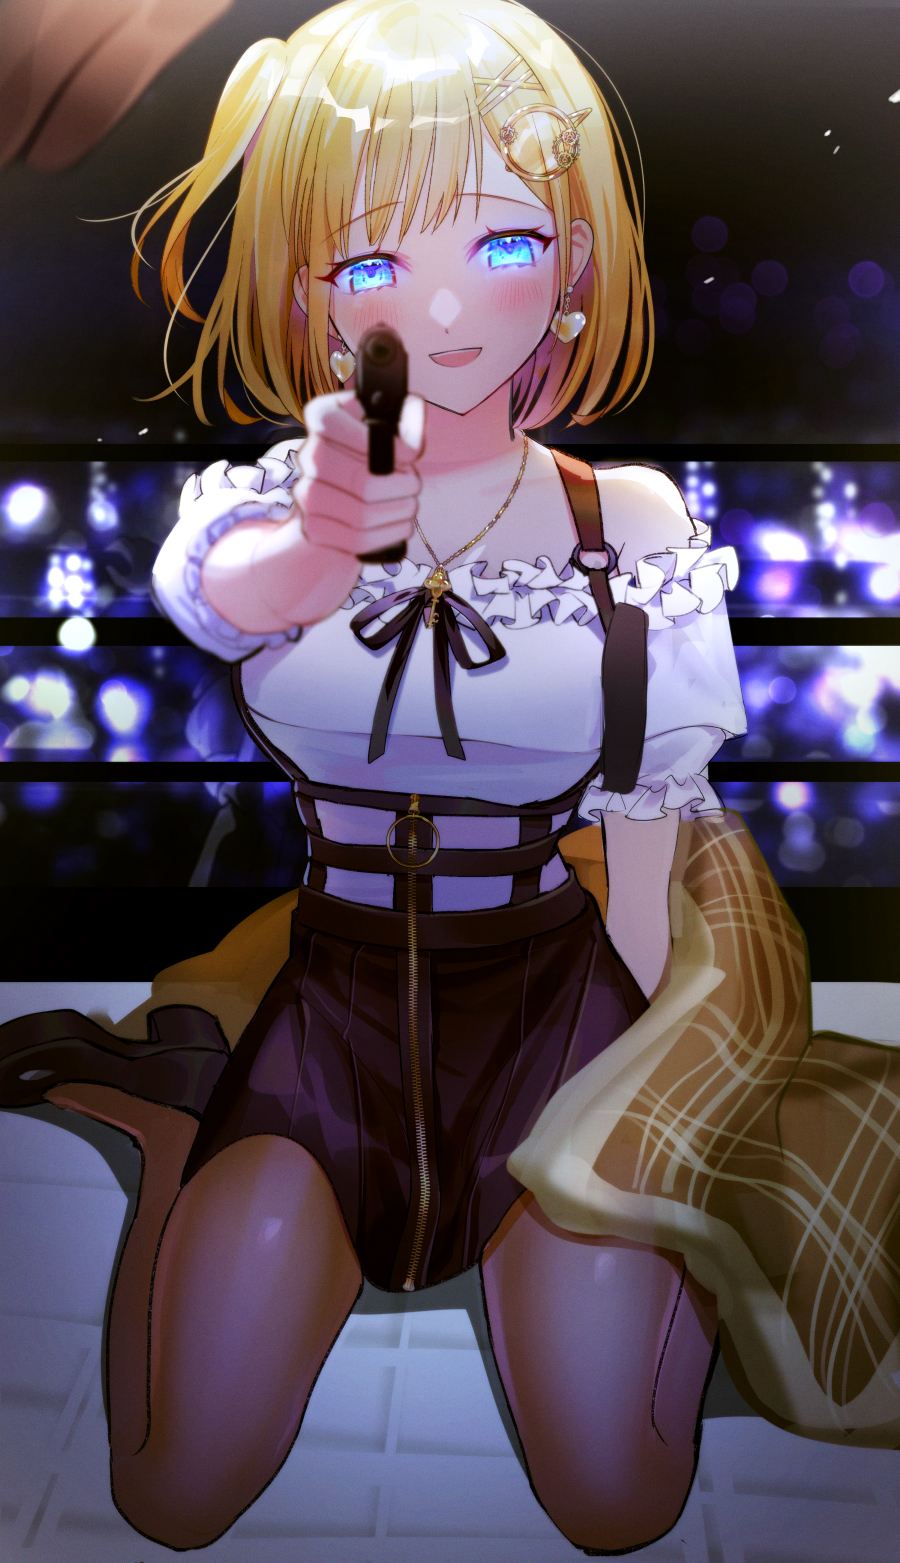 1girl :d bangs bare_shoulders blonde_hair blue_eyes blurry blush breasts dega1028 depth_of_field earrings eyebrows_visible_through_hair finger_on_trigger glowing glowing_eyes gun hair_ornament handgun heart heart_earrings high_heels highres holding holding_gun holding_weapon hololive hololive_english holster jewelry key looking_at_viewer medium_breasts monocle_hair_ornament necklace one_side_up open_mouth pantyhose pistol pointing_weapon pov shirt shoes short_hair skirt smile solo virtual_youtuber watson_amelia weapon white_shirt zipper